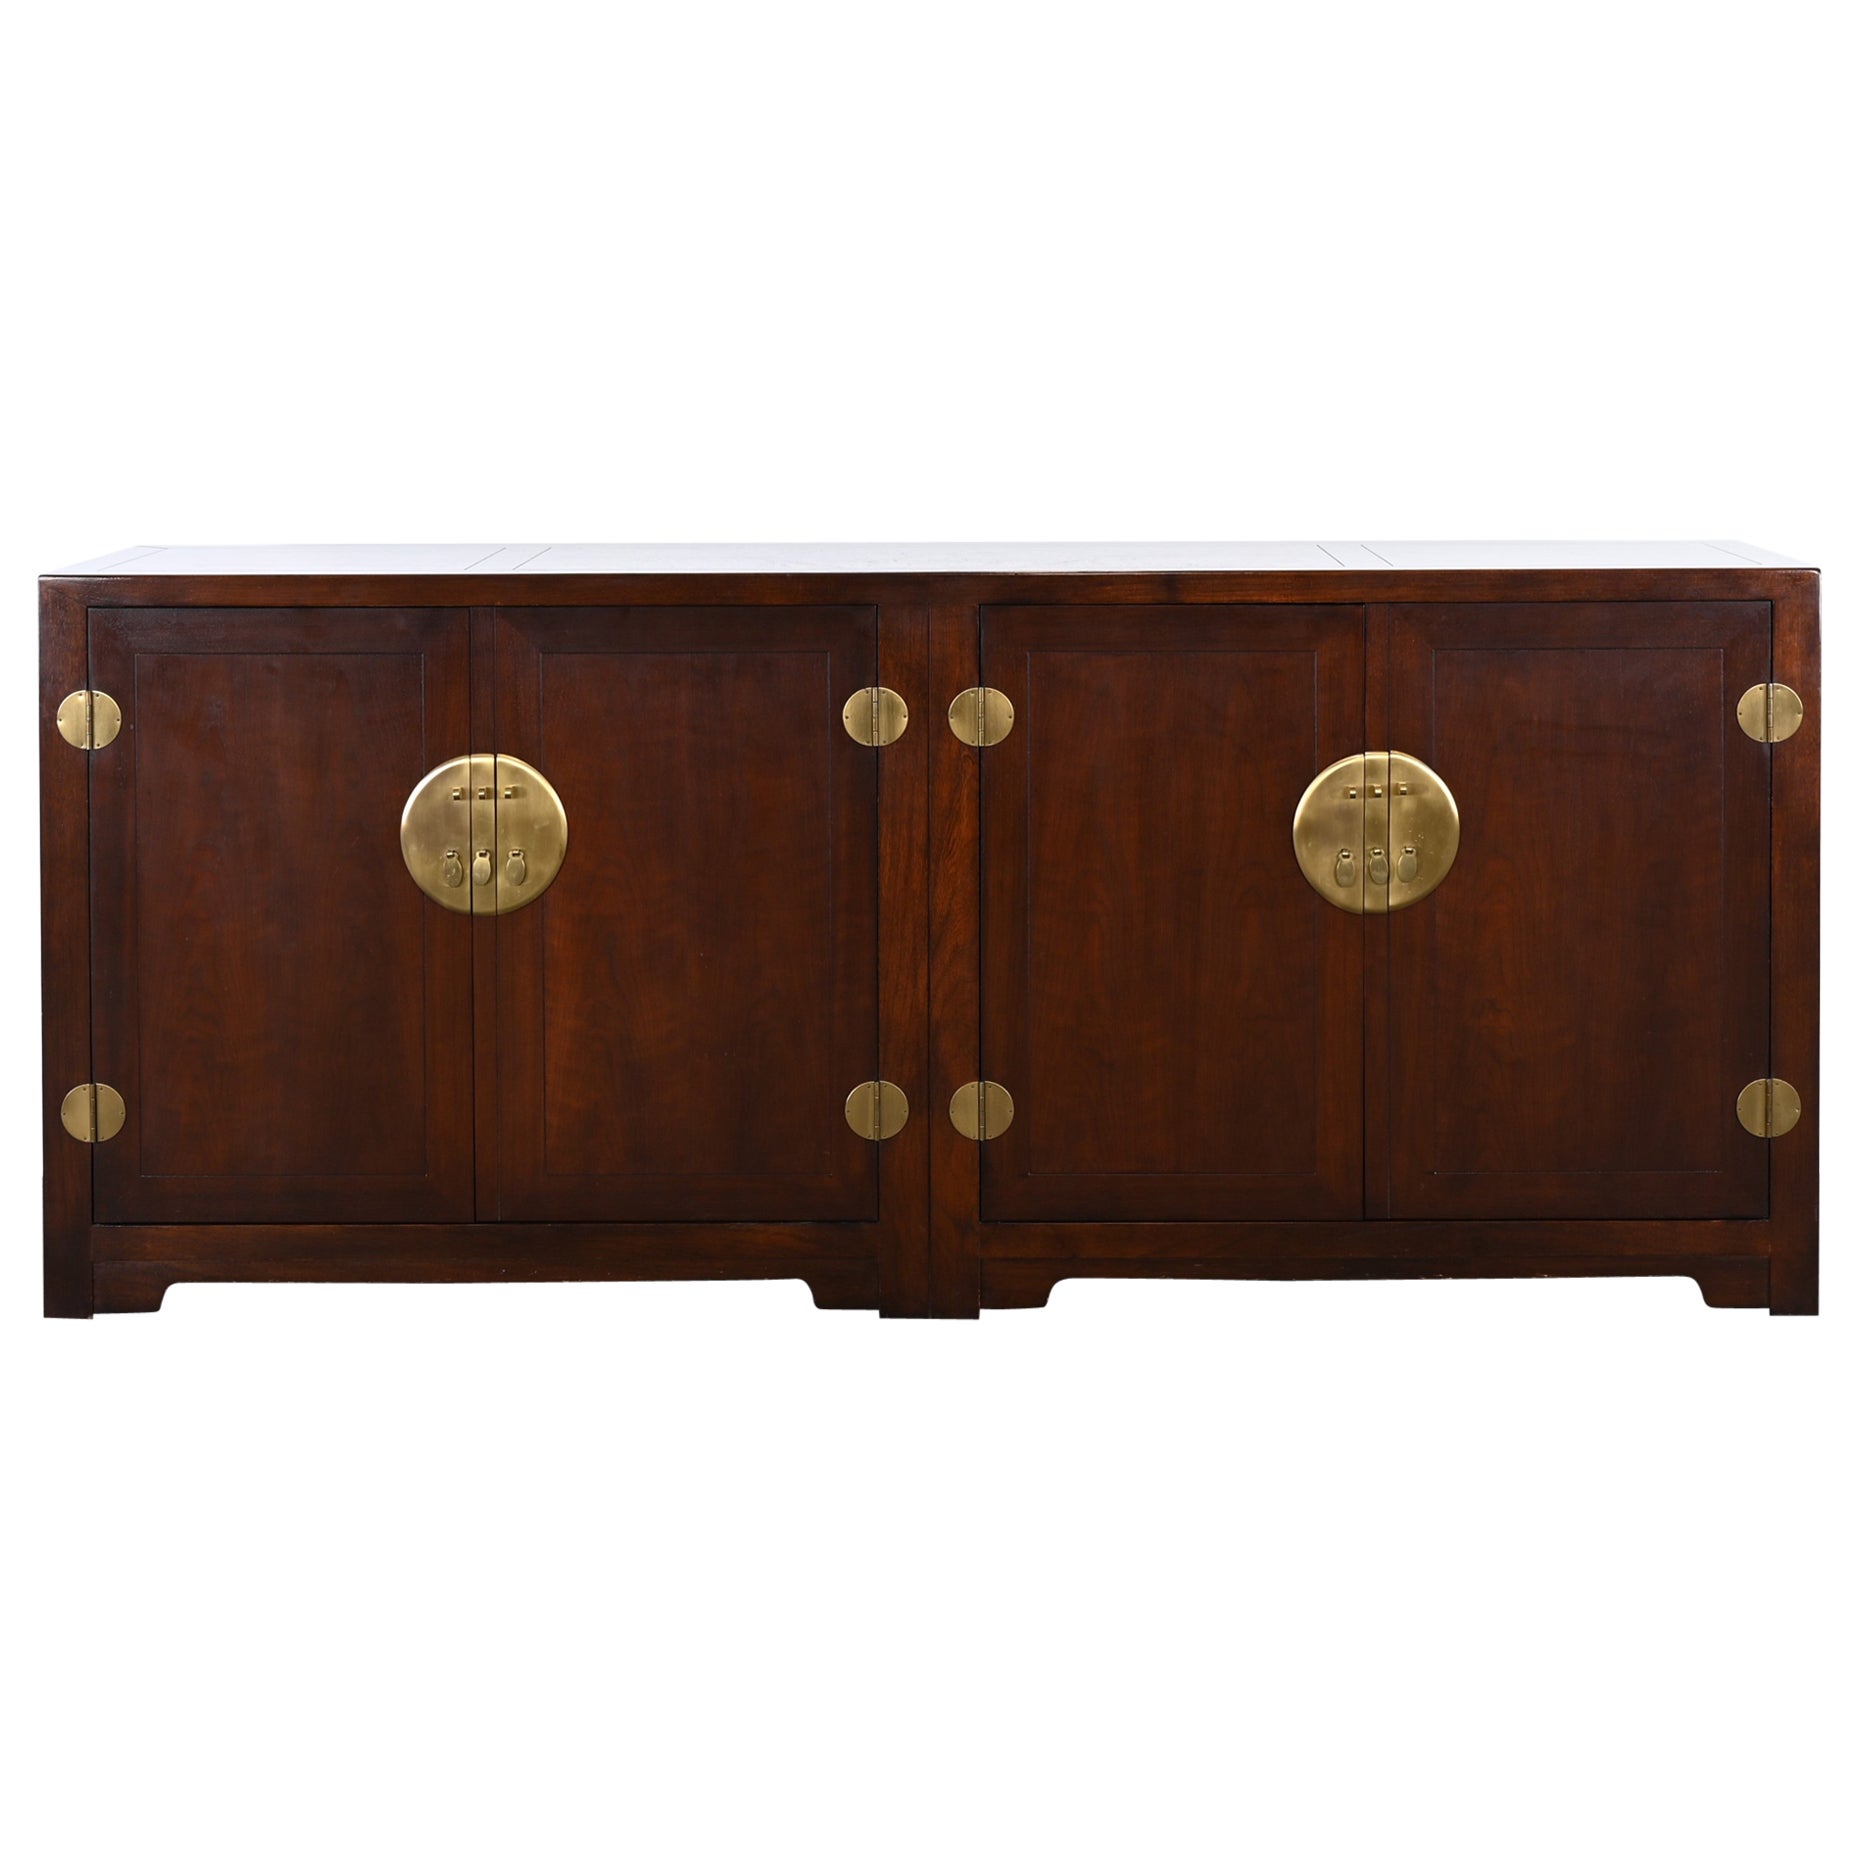 Michael Taylor Asian Credenza by Baker, 20th Century